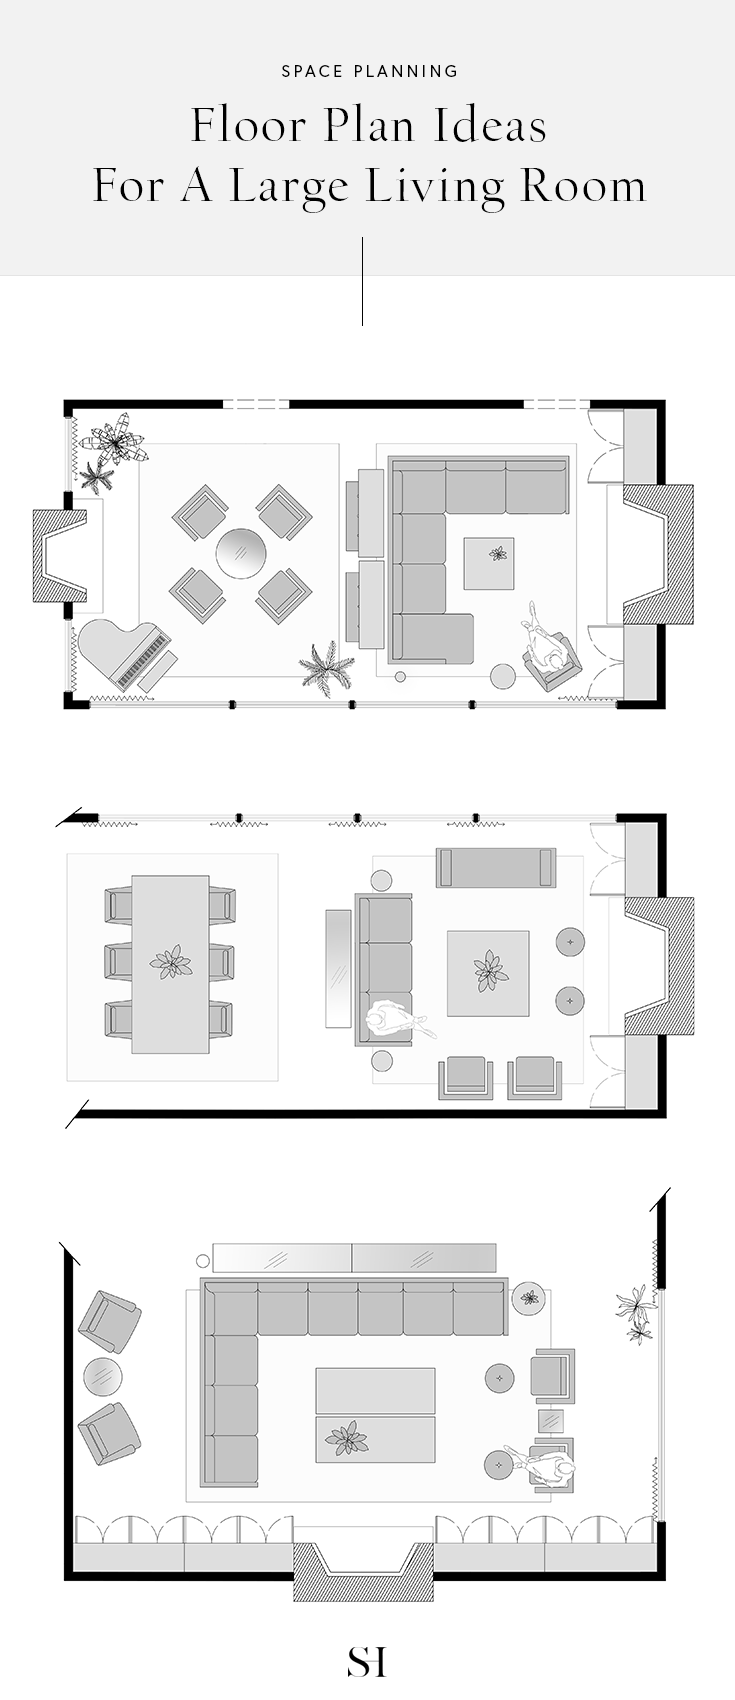 5 Furniture Layout Ideas for a Large Living Room, with Floor Plans -   13 garden design Layout furniture arrangement ideas